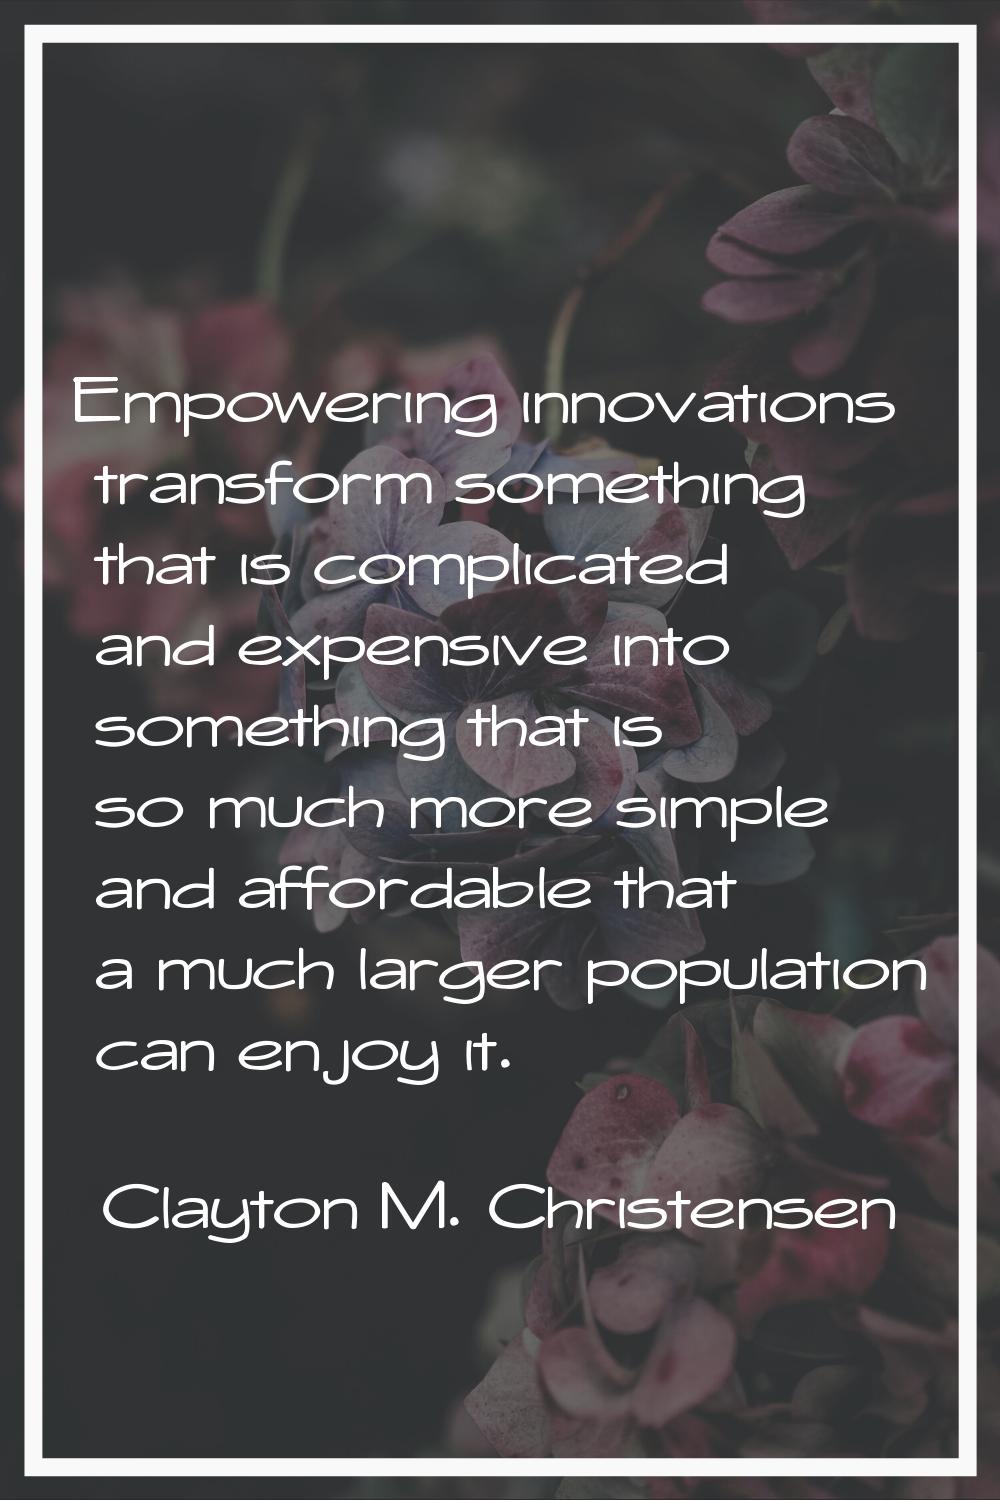 Empowering innovations transform something that is complicated and expensive into something that is